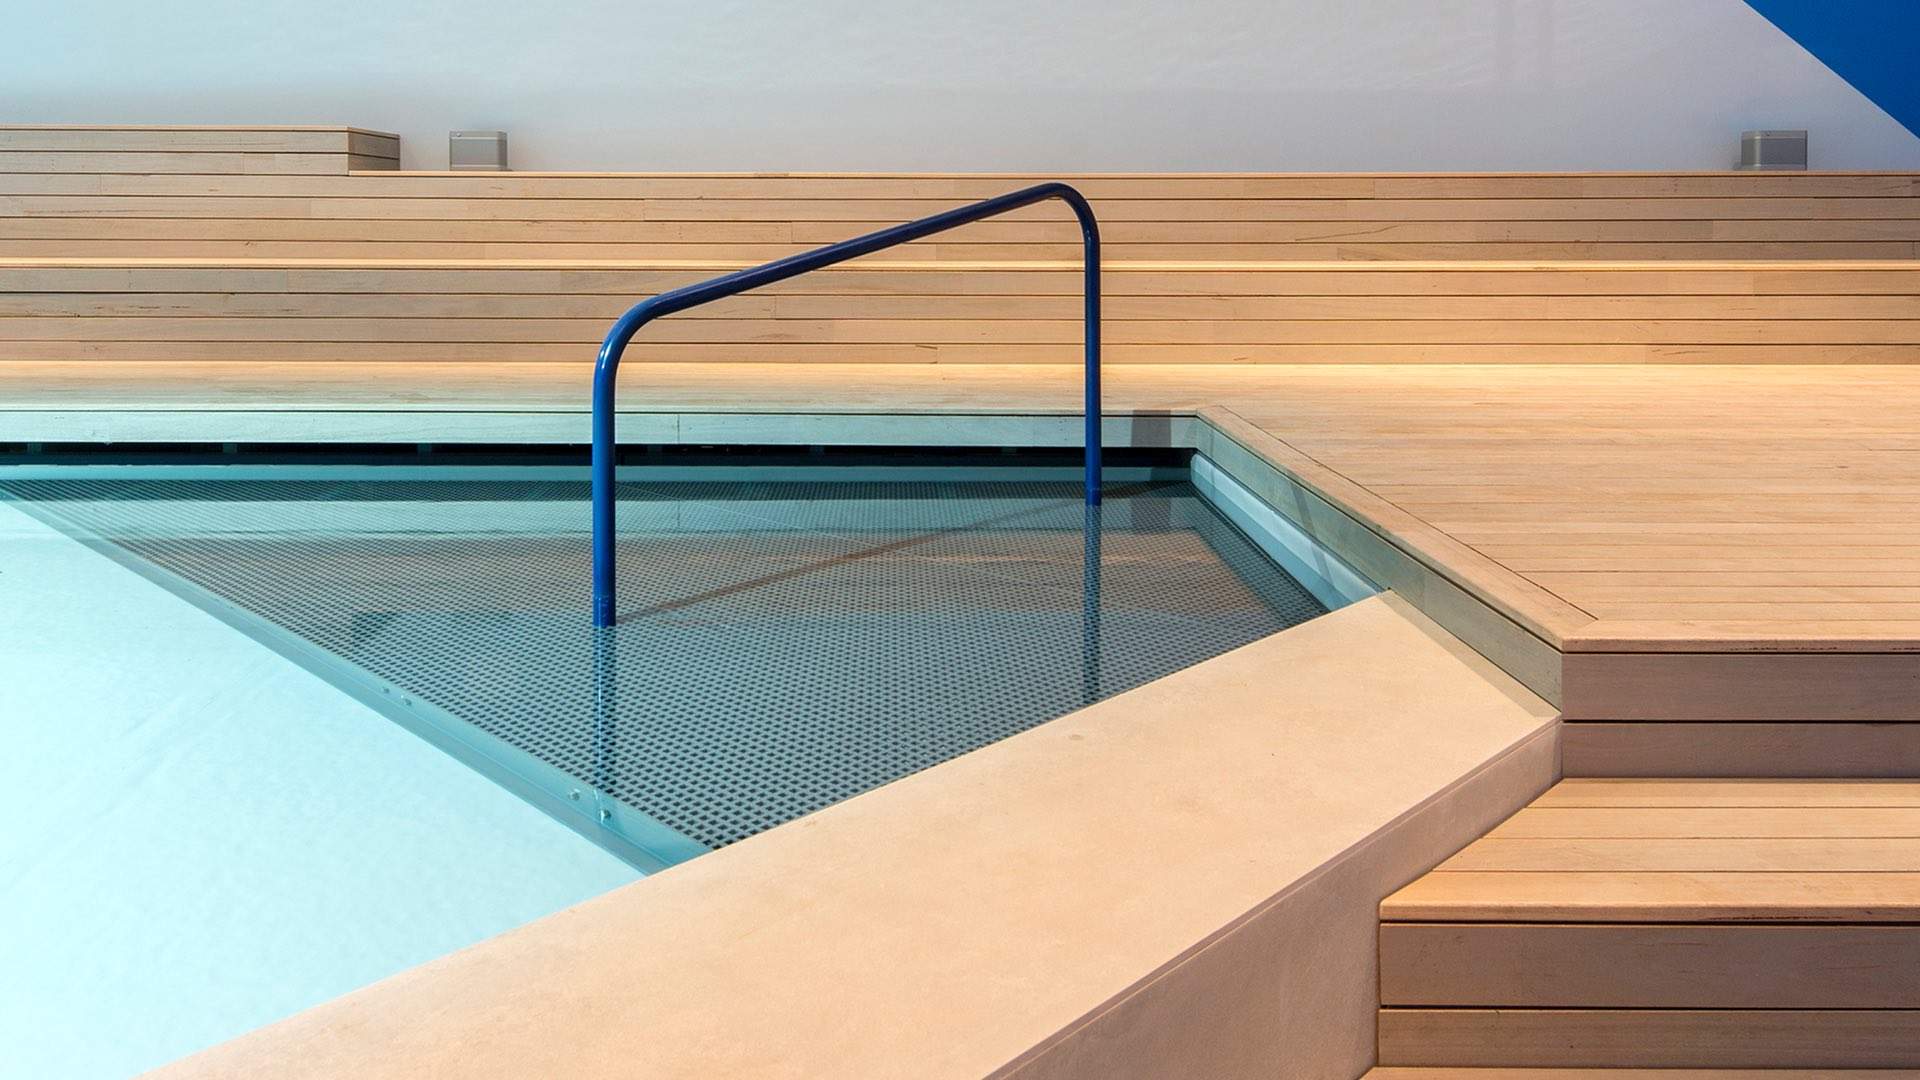 NGV Australia Will Install an 11-Metre Indoor Swimming Pool for an Upcoming Exhibition